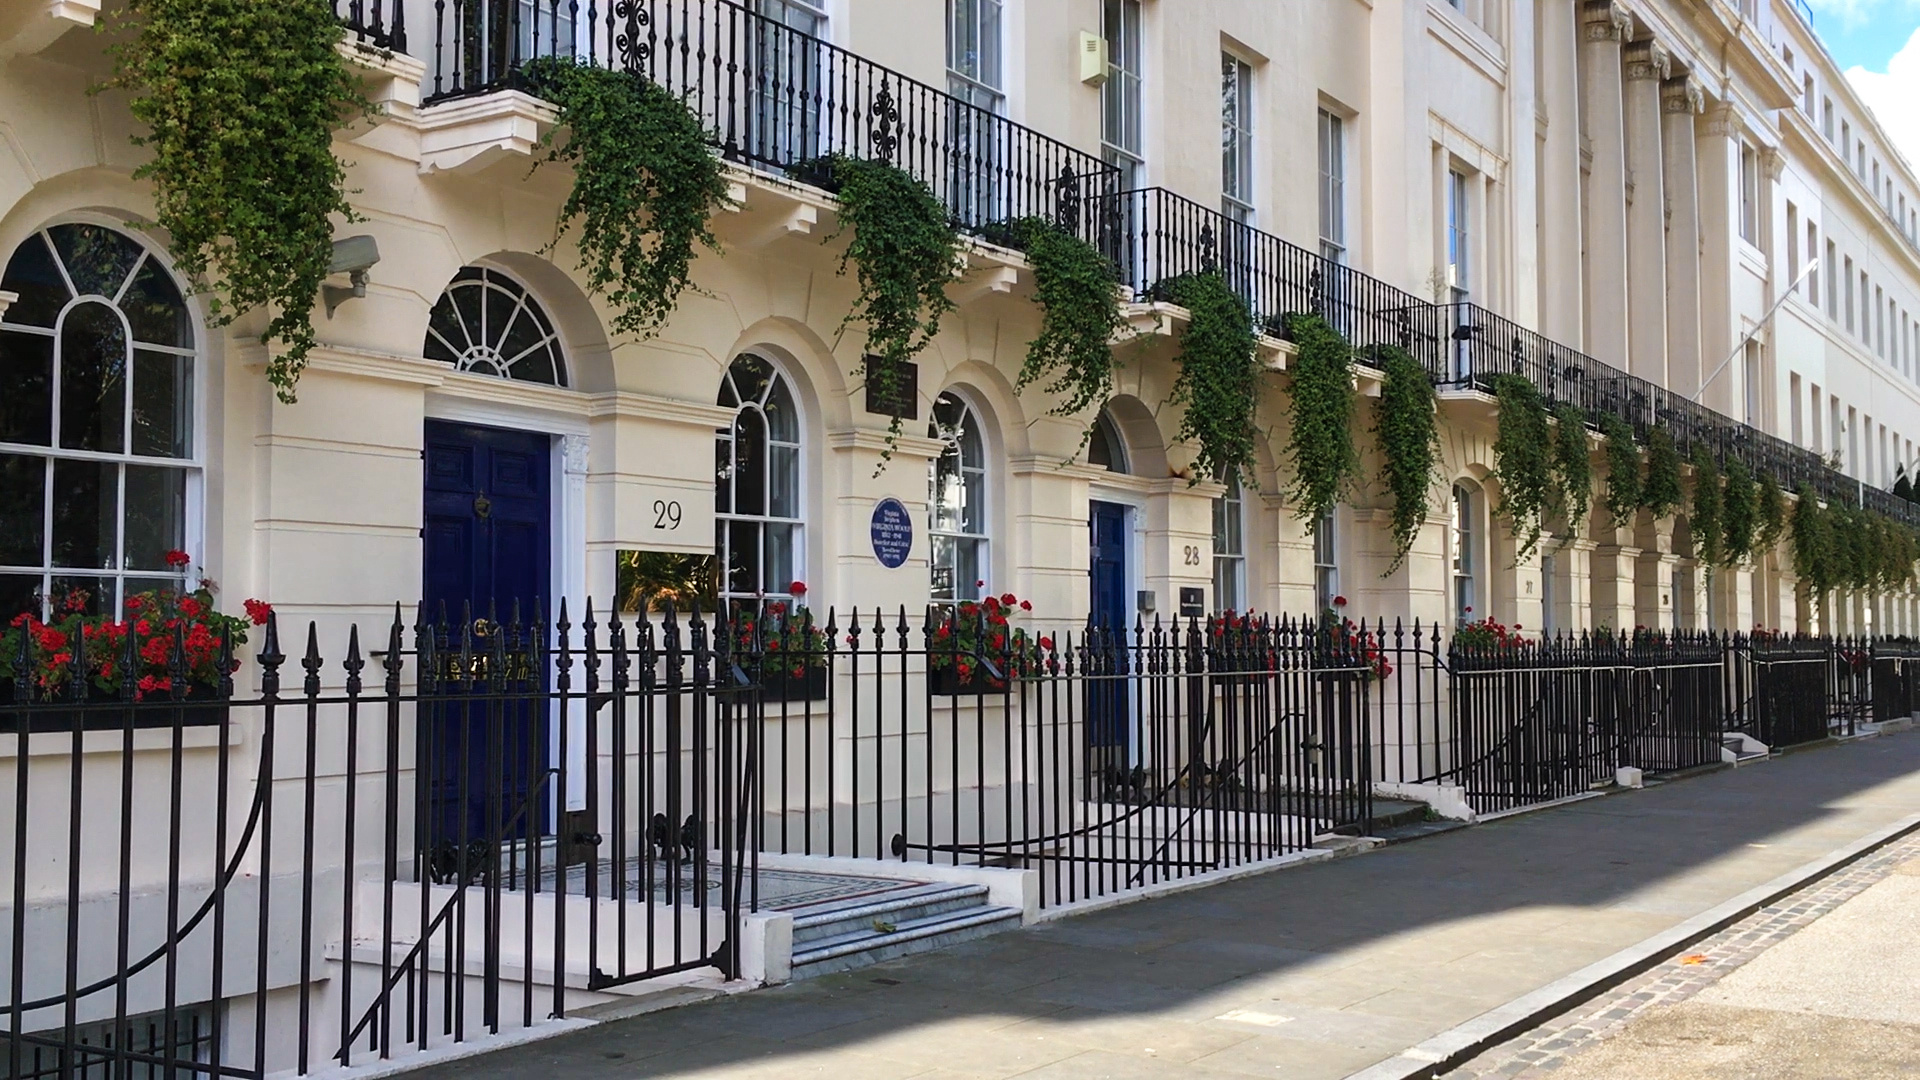 Virginia Woolf house, 29 Fitzroy Square, London